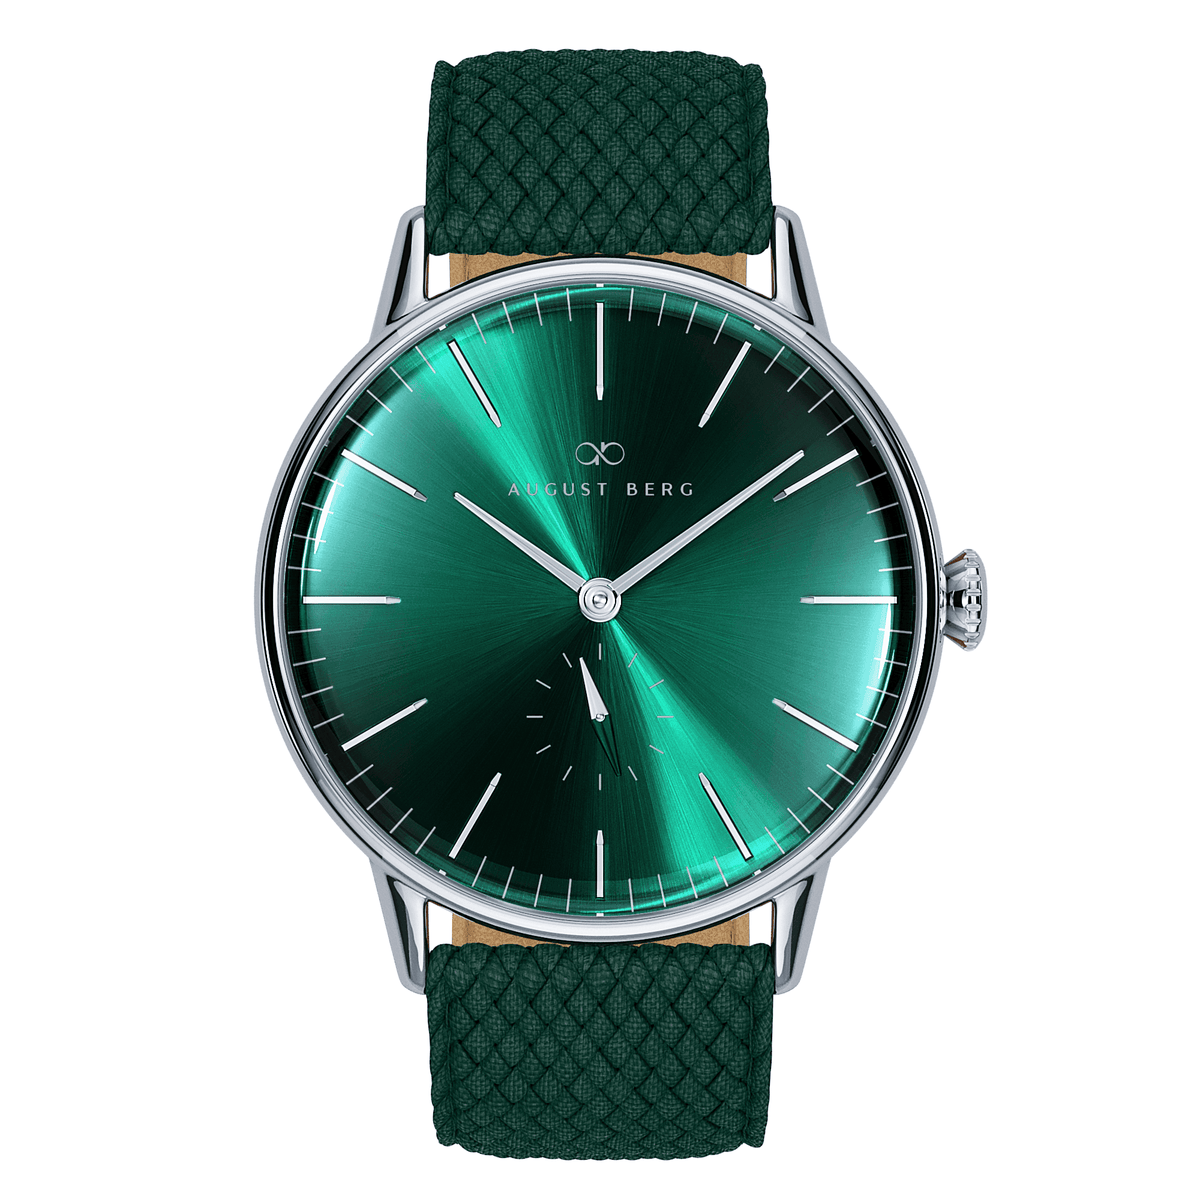 August Berg Unisex Serenity Stainless Steel Quartz Fashion 40mm Watch Green Dial 10140E11VGN - Wallace Bishop